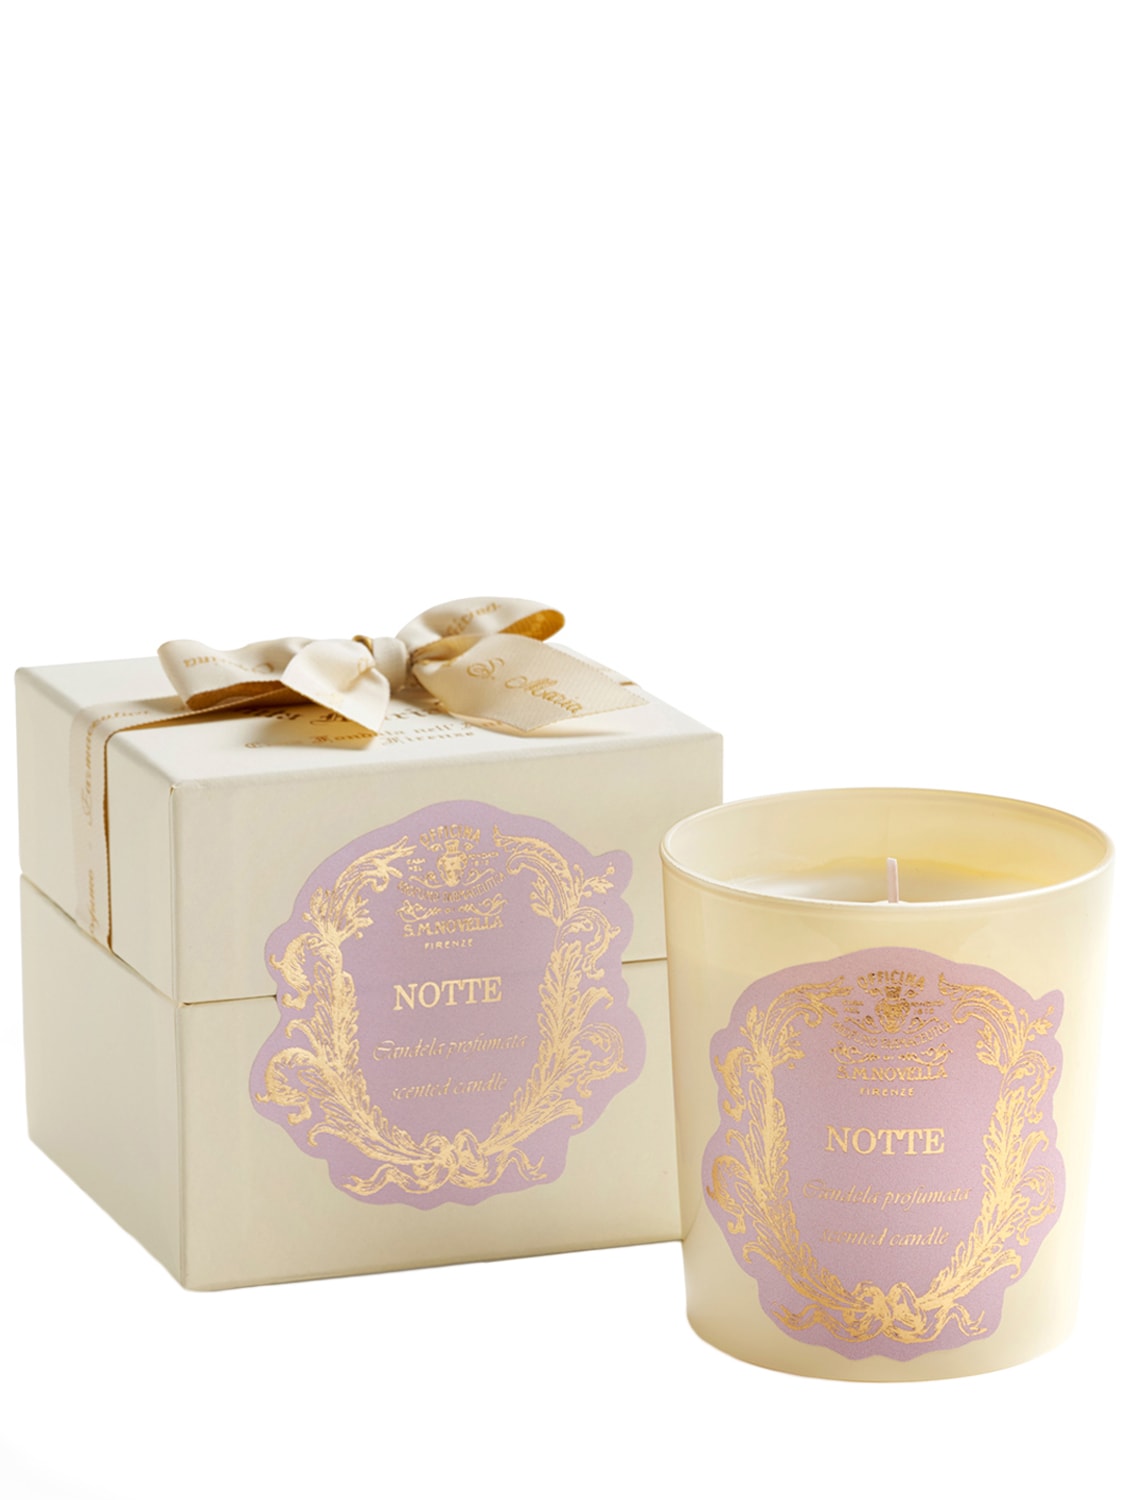 Image of 200gr Notte Scented Candle